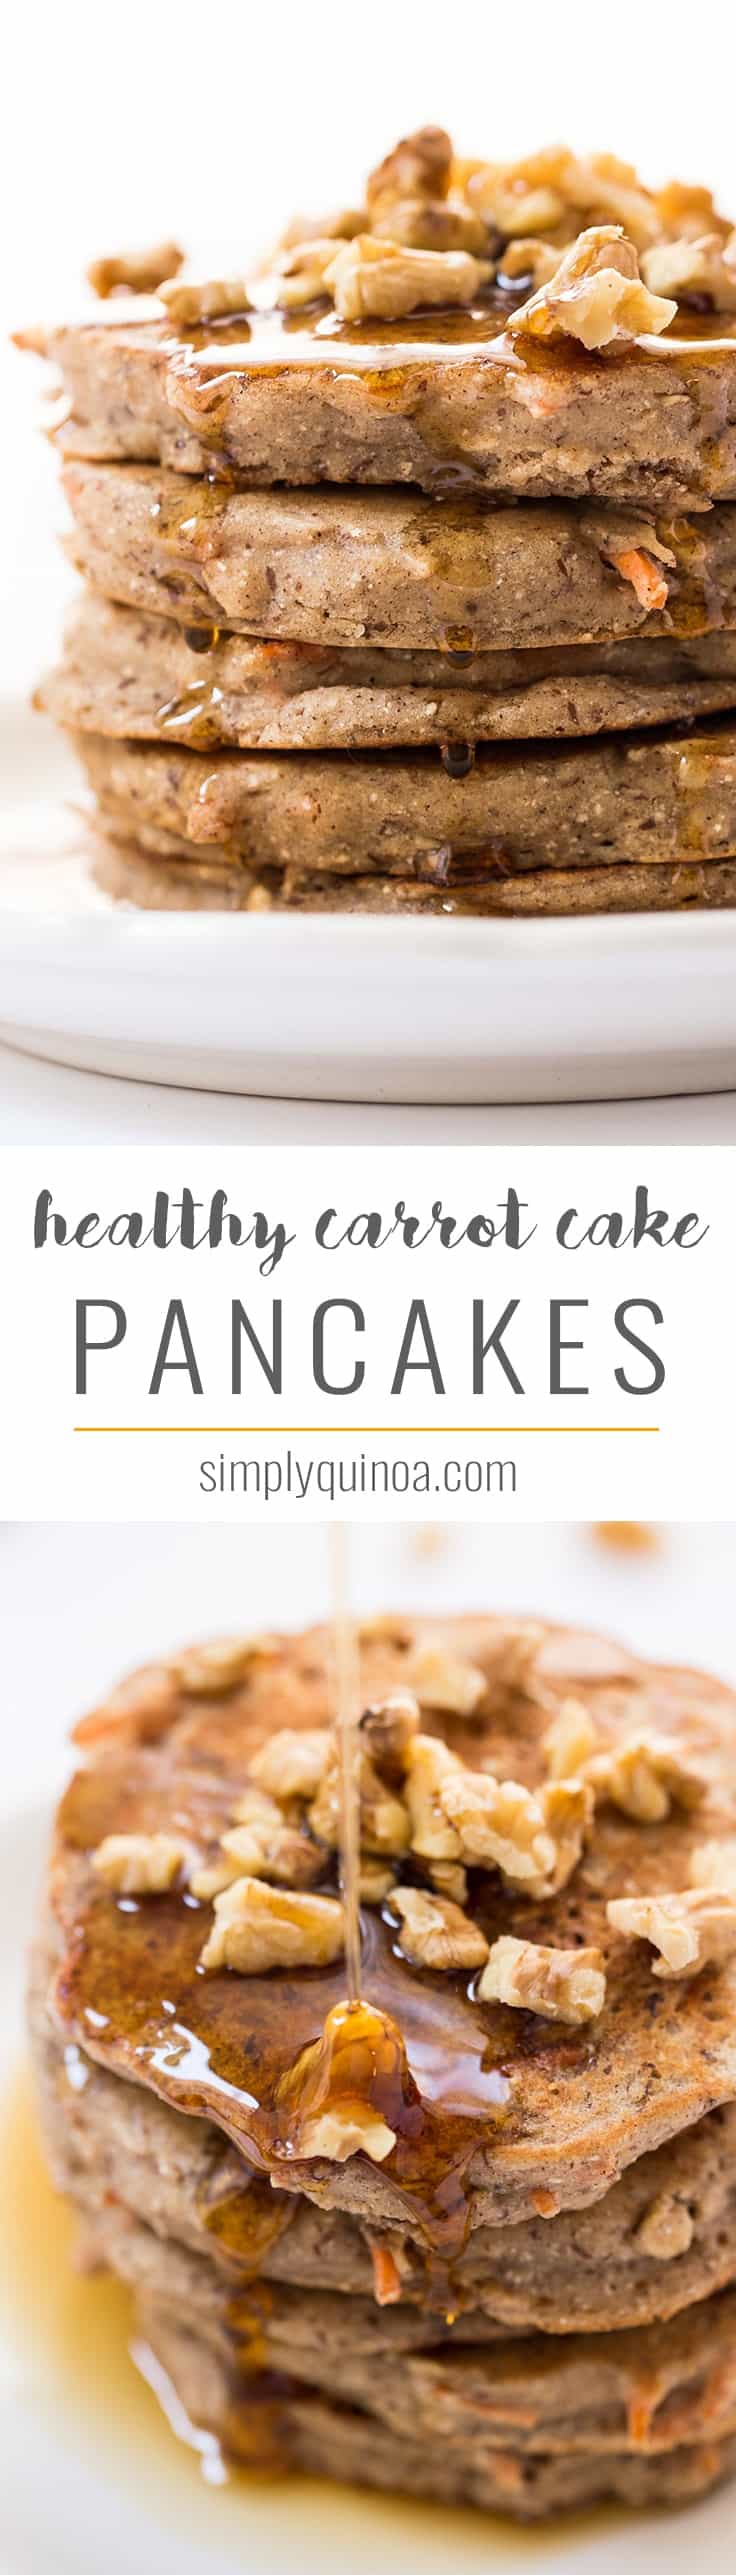 These HEALTHY Carrot Cake Pancakes are packed with nutritious ingredients like quinoa, almond, flax and coconut! The perfect way to kickstart your day!